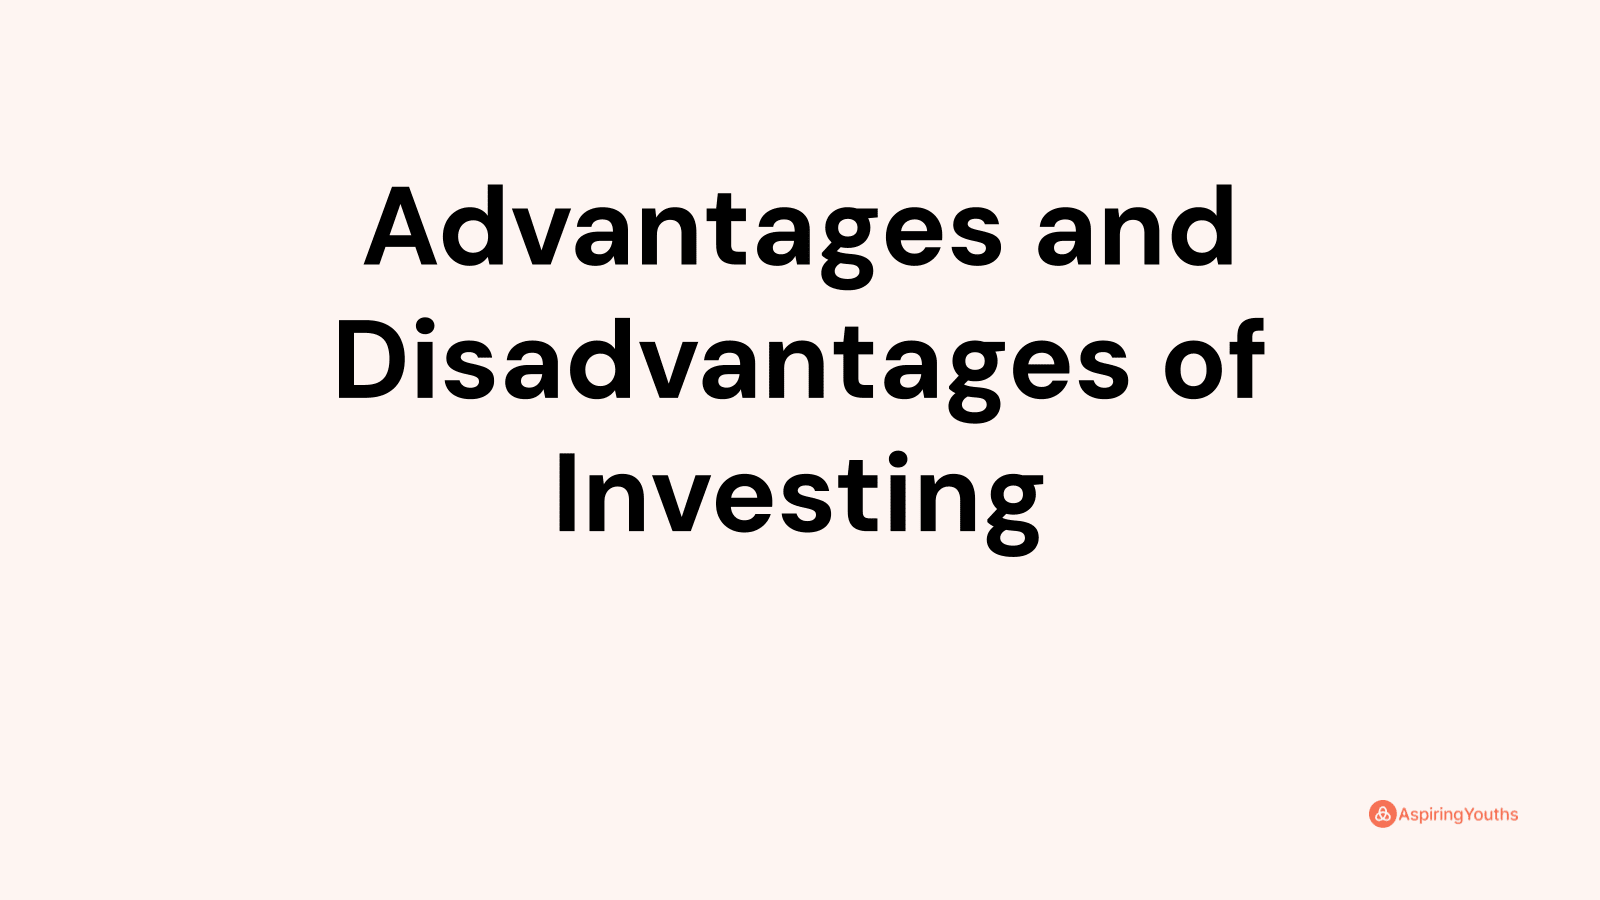 Advantages and disadvantages of Investing